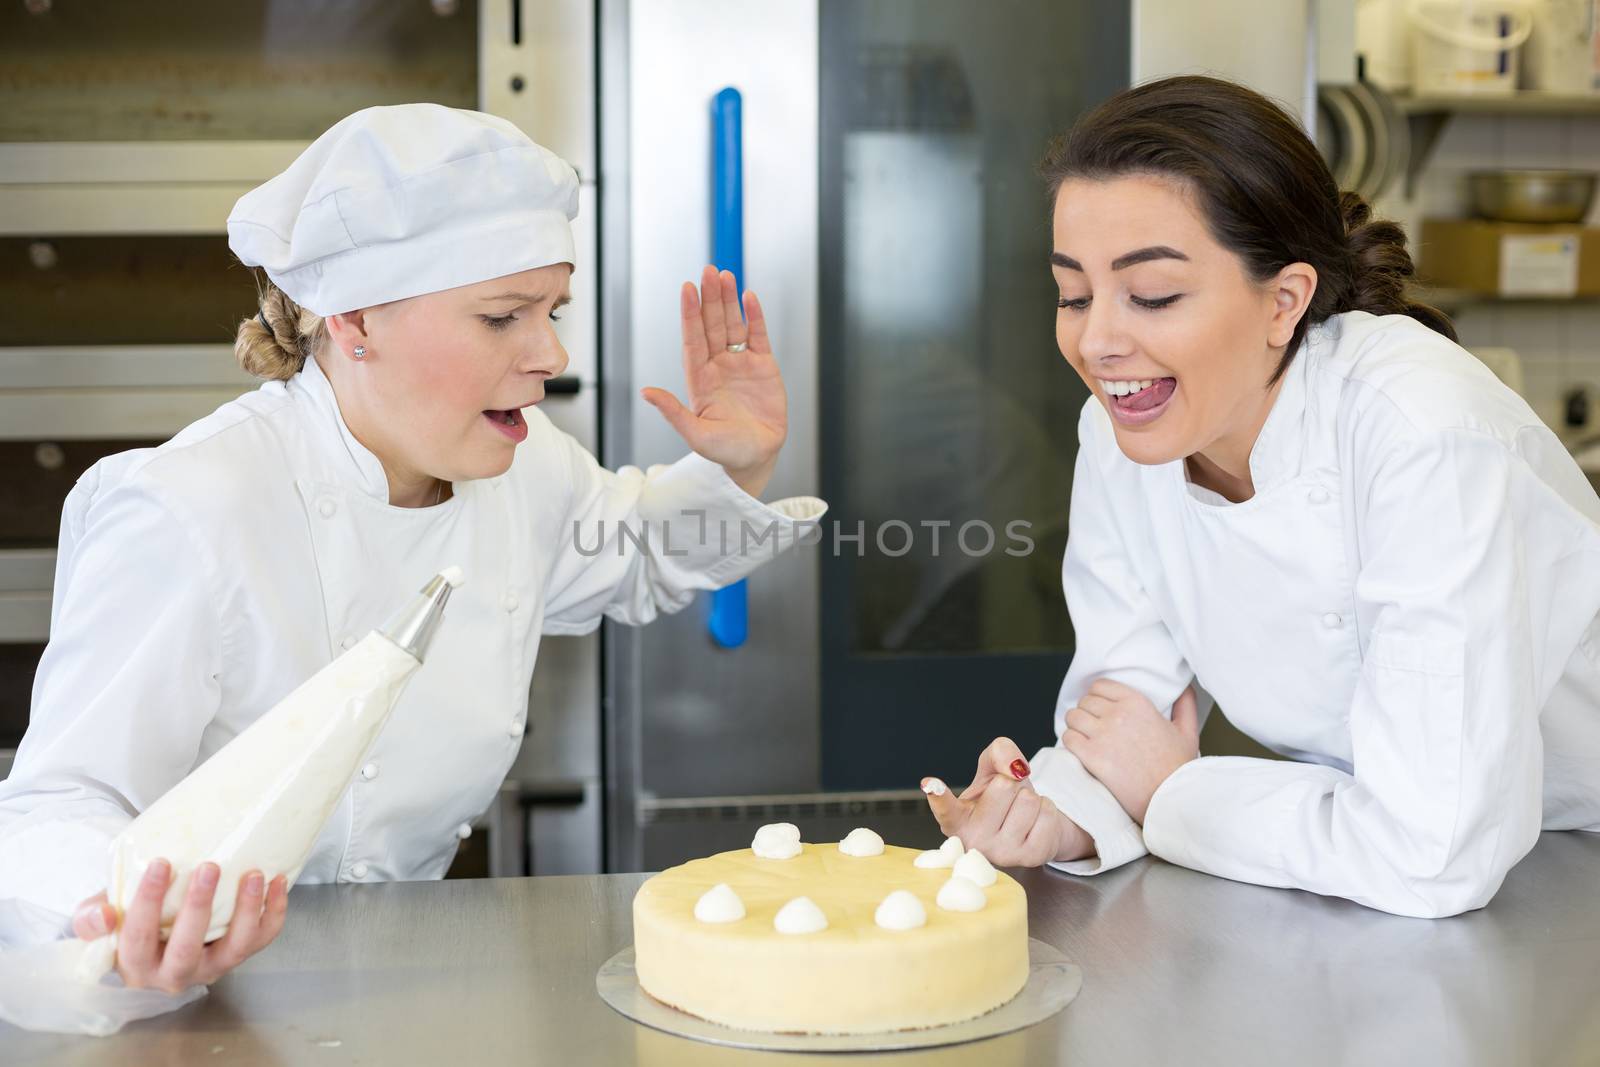 Confectioner apprentice nibbling whipped cream from cake in bakery